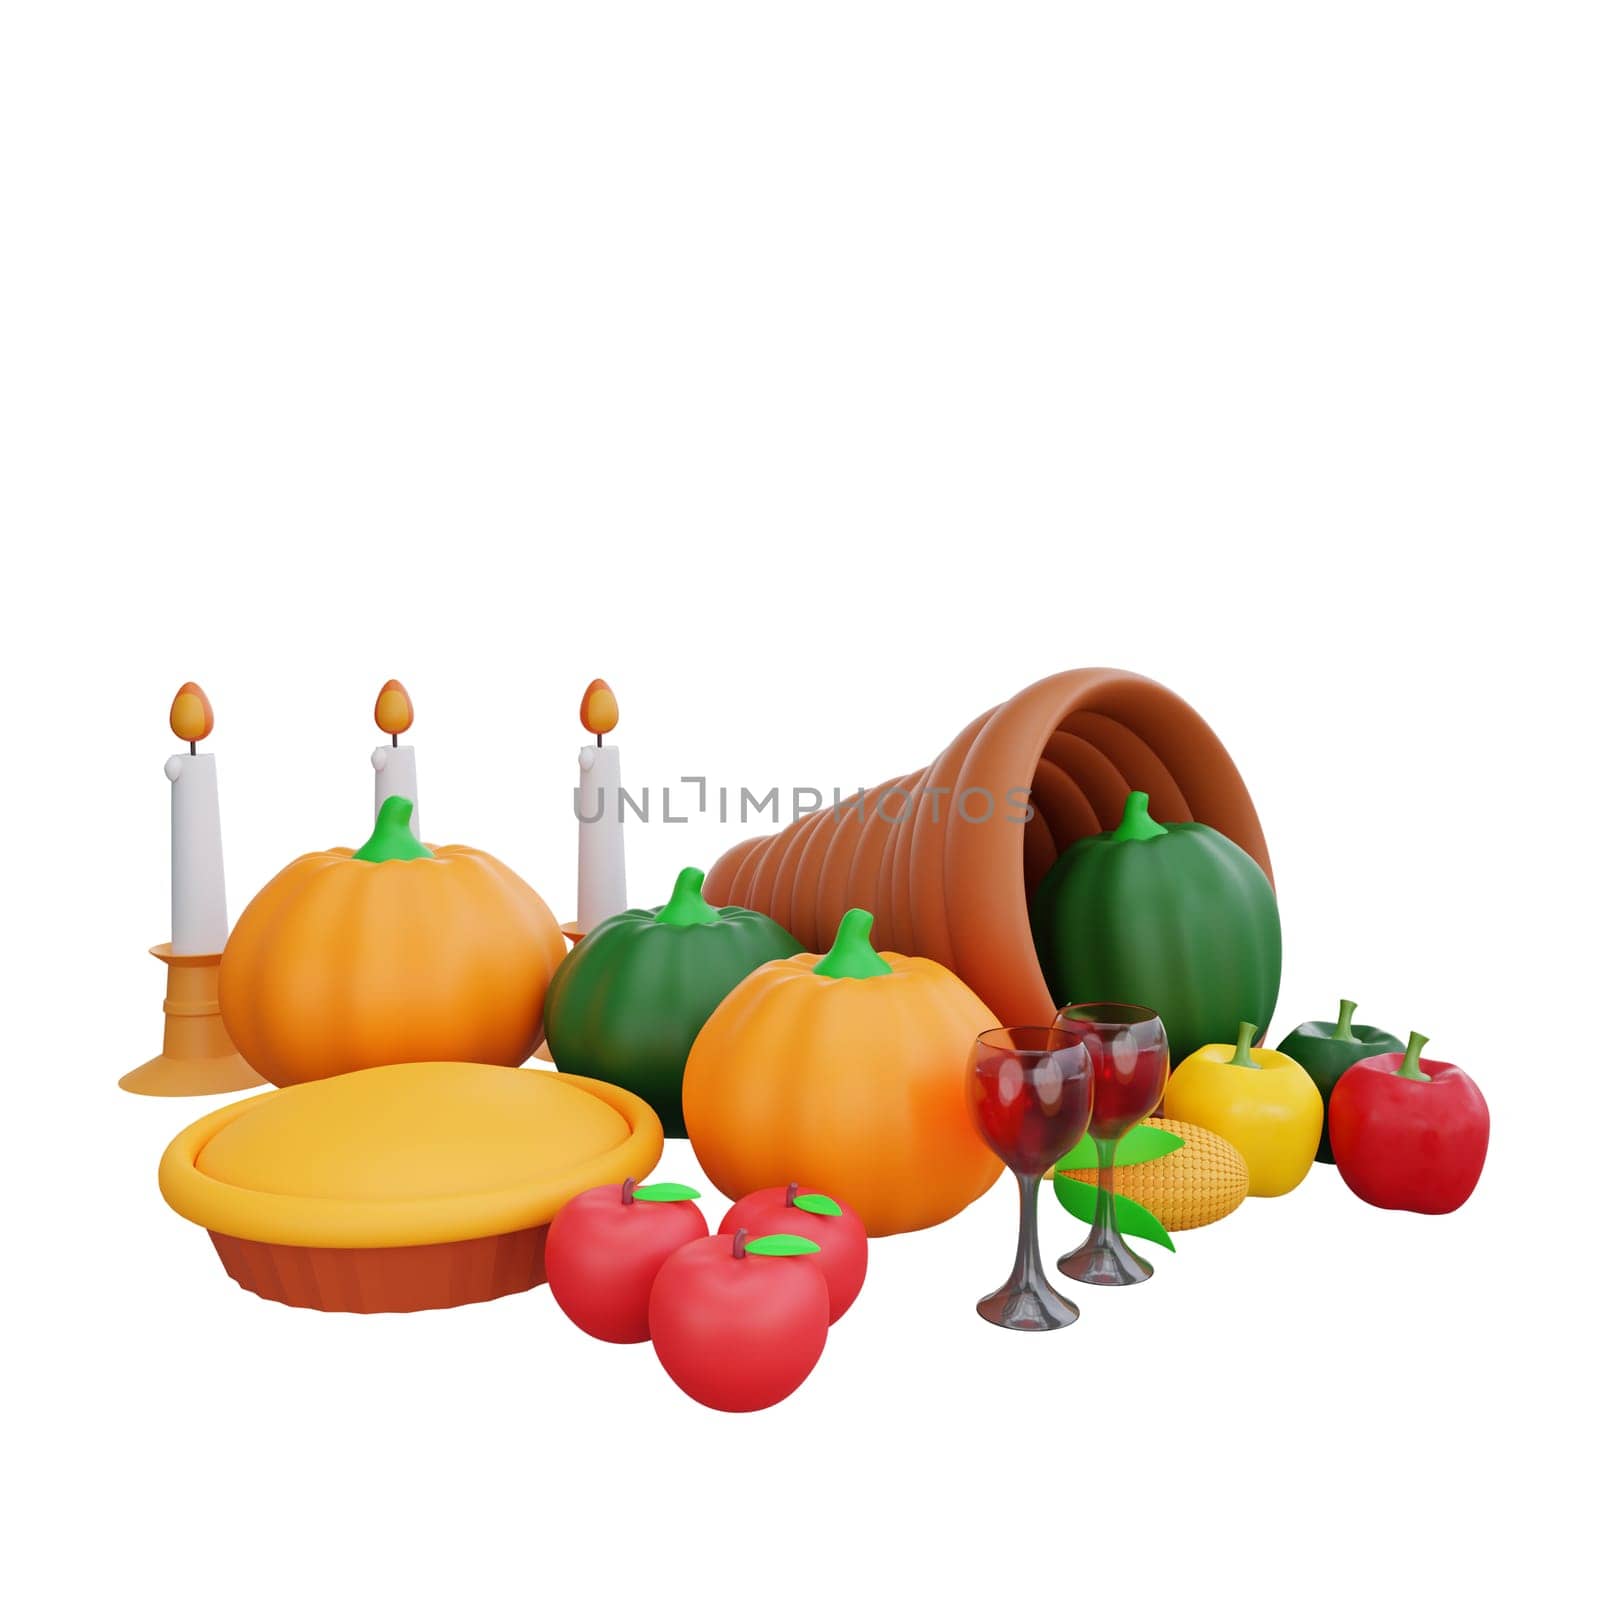 3D rendering of a festive Thanksgiving table setting, featuring a cornucopia overflowing with gourds, surrounded by pumpkins, candles, and other decorations